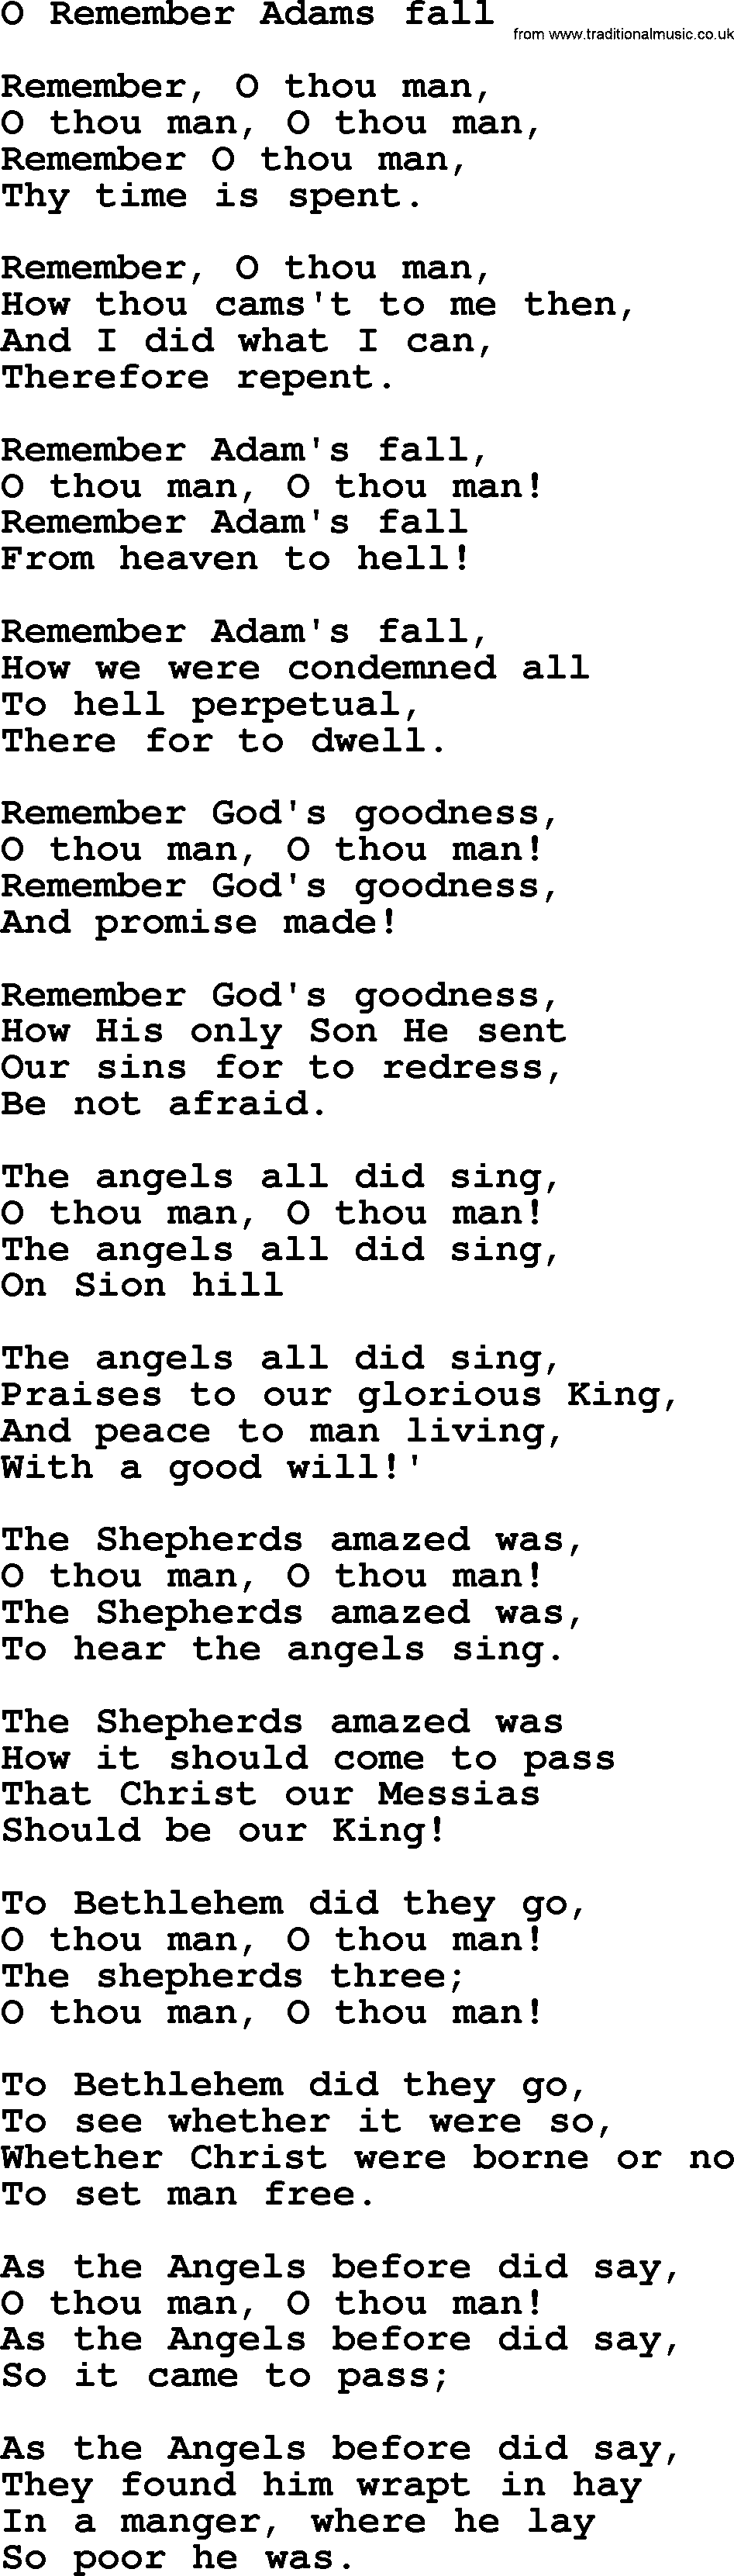 Christmas Hymns, Carols and Songs, title: O Remember Adams Fall - complete lyrics, and PDF